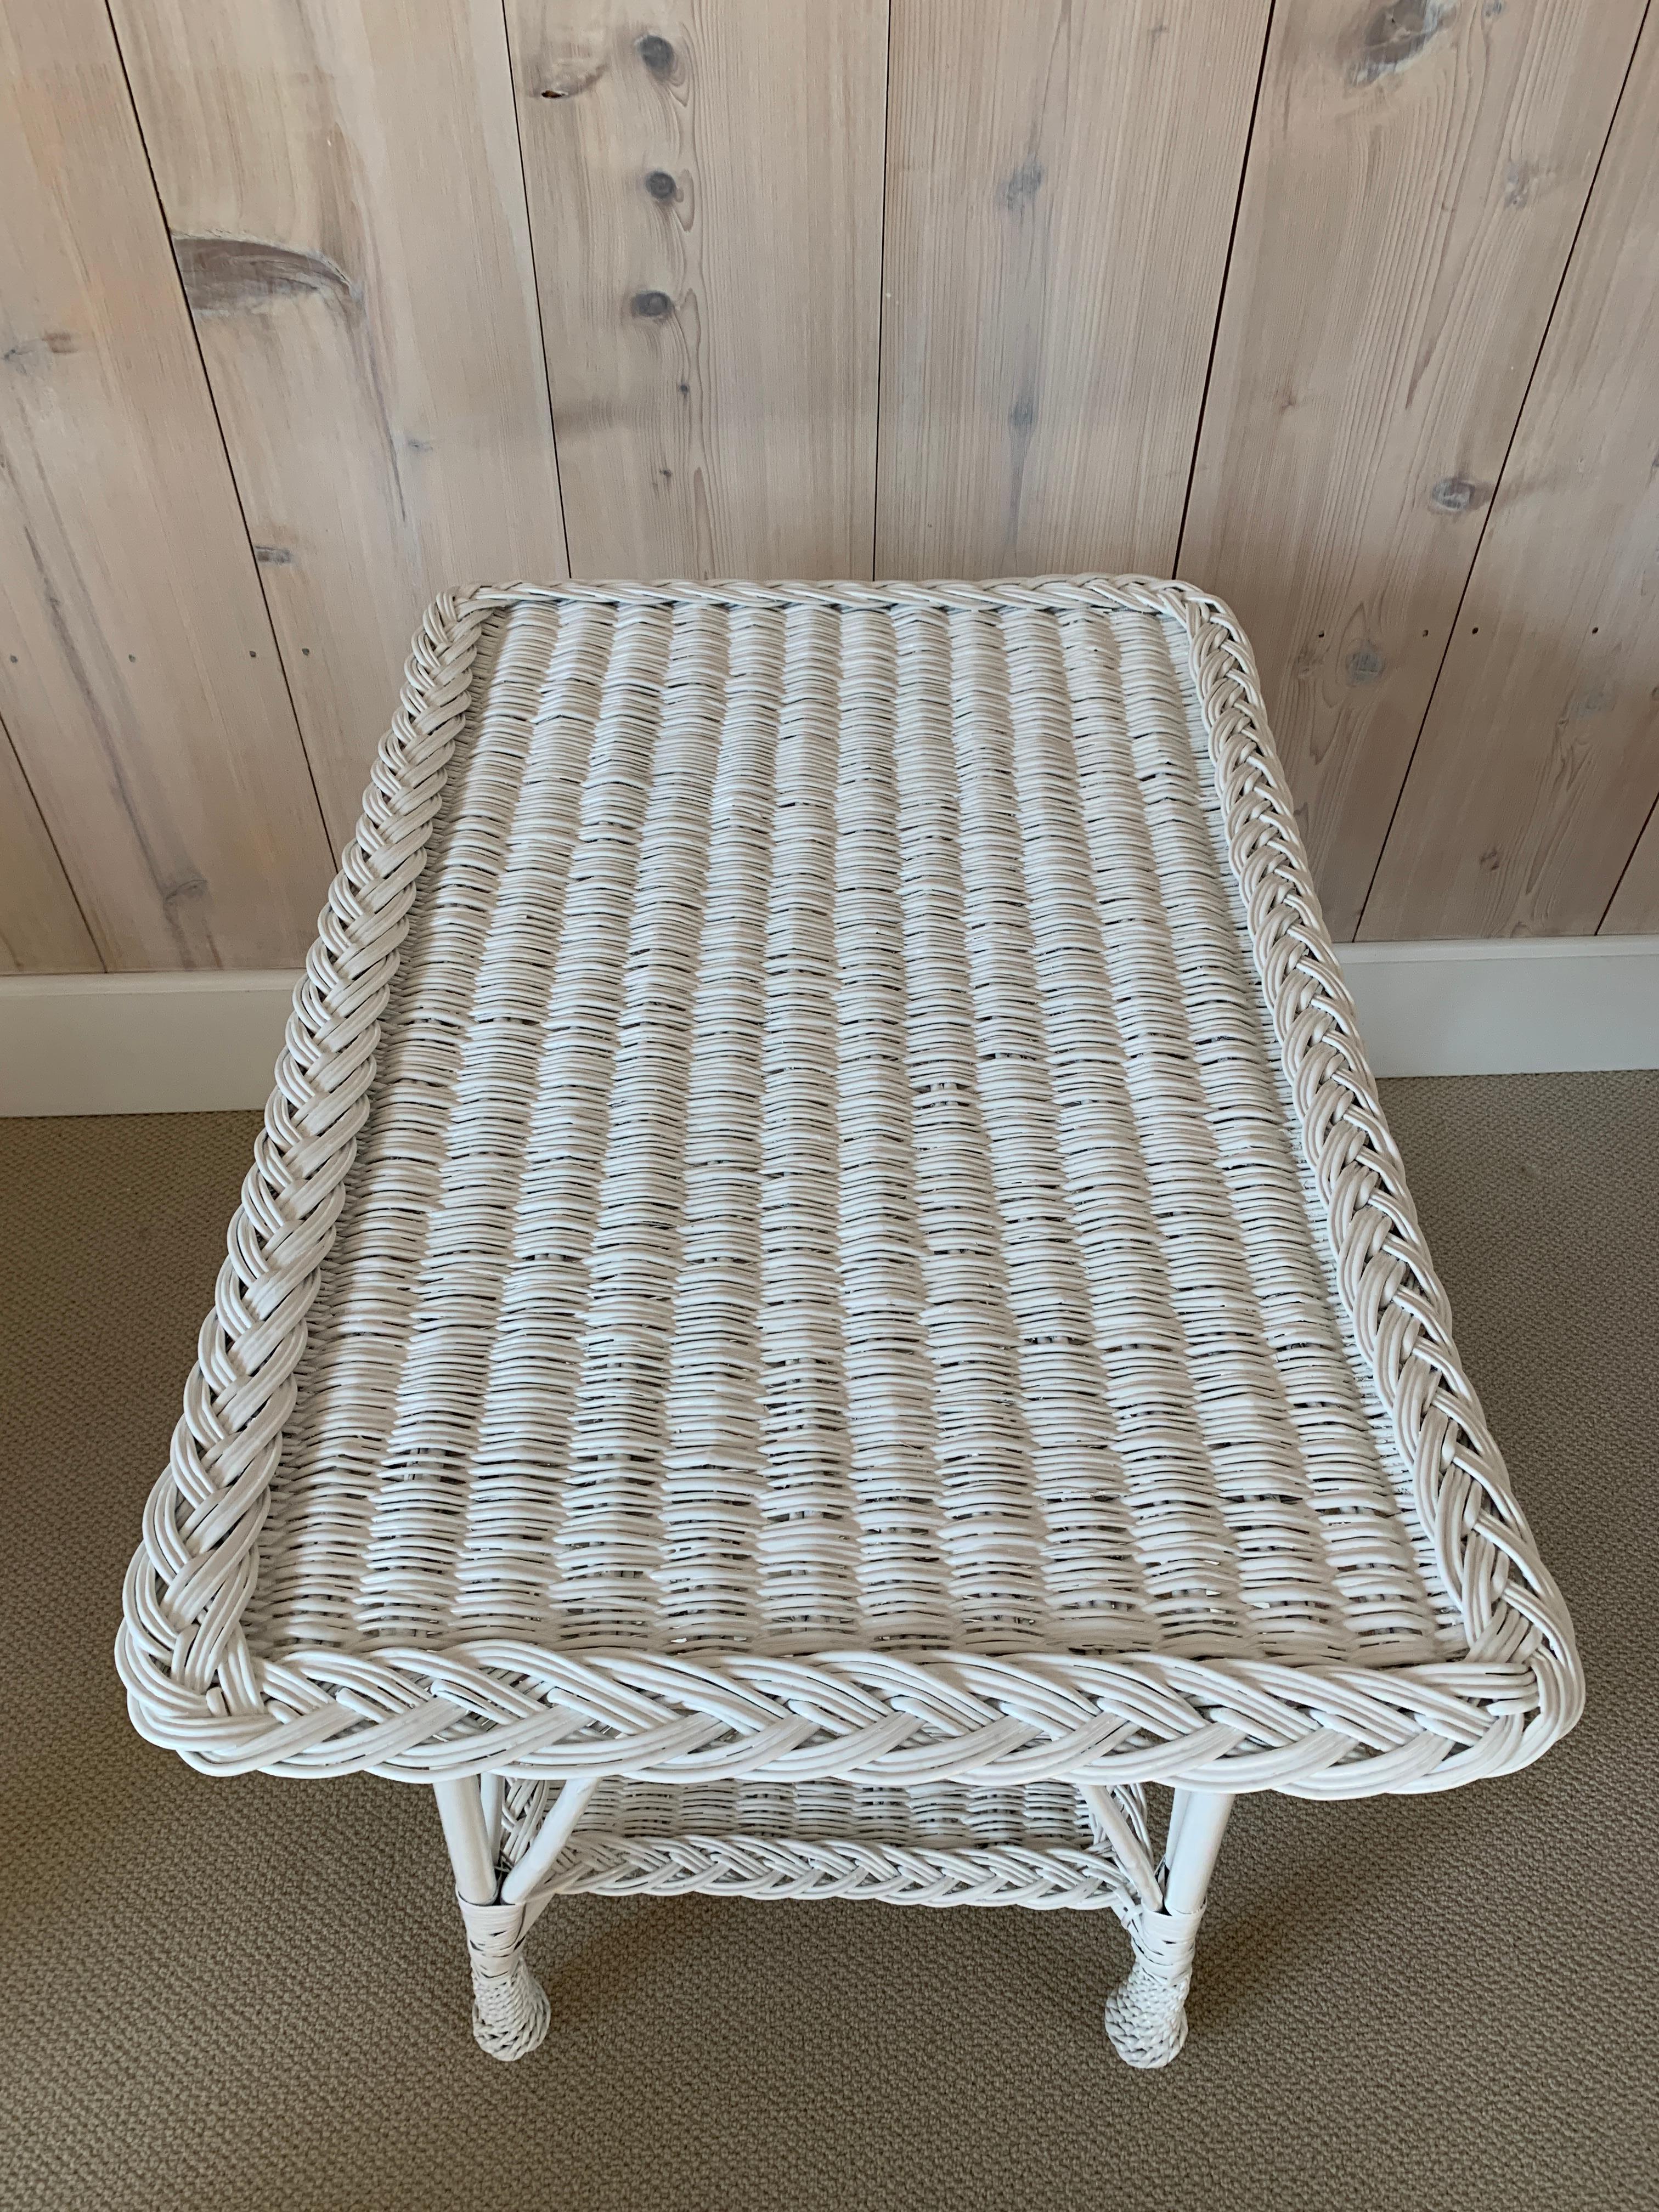 Early 20th Century Antique Wicker Table For Sale